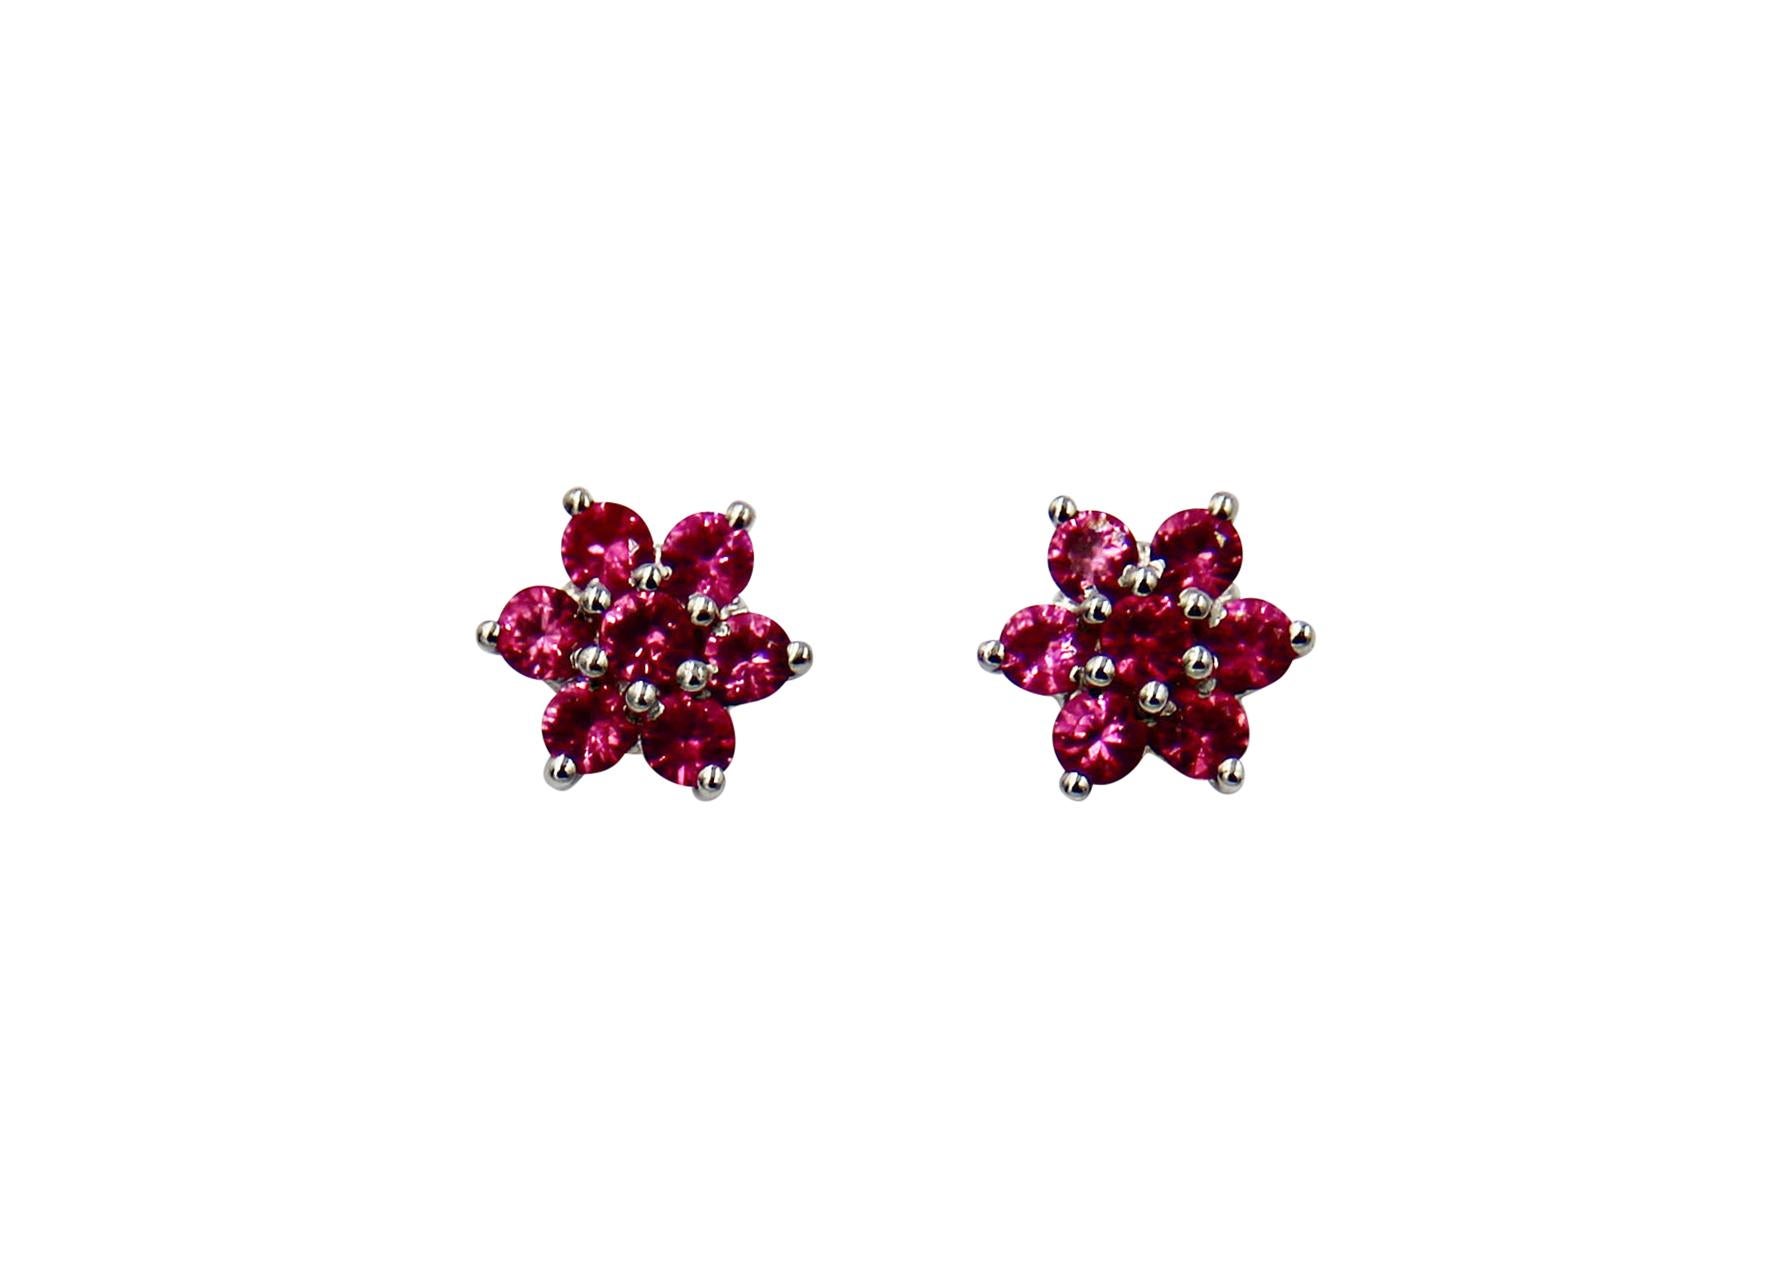 Hot Pink Spinel set in 18 Karat white gold.
Elegant earrings for any occasion.